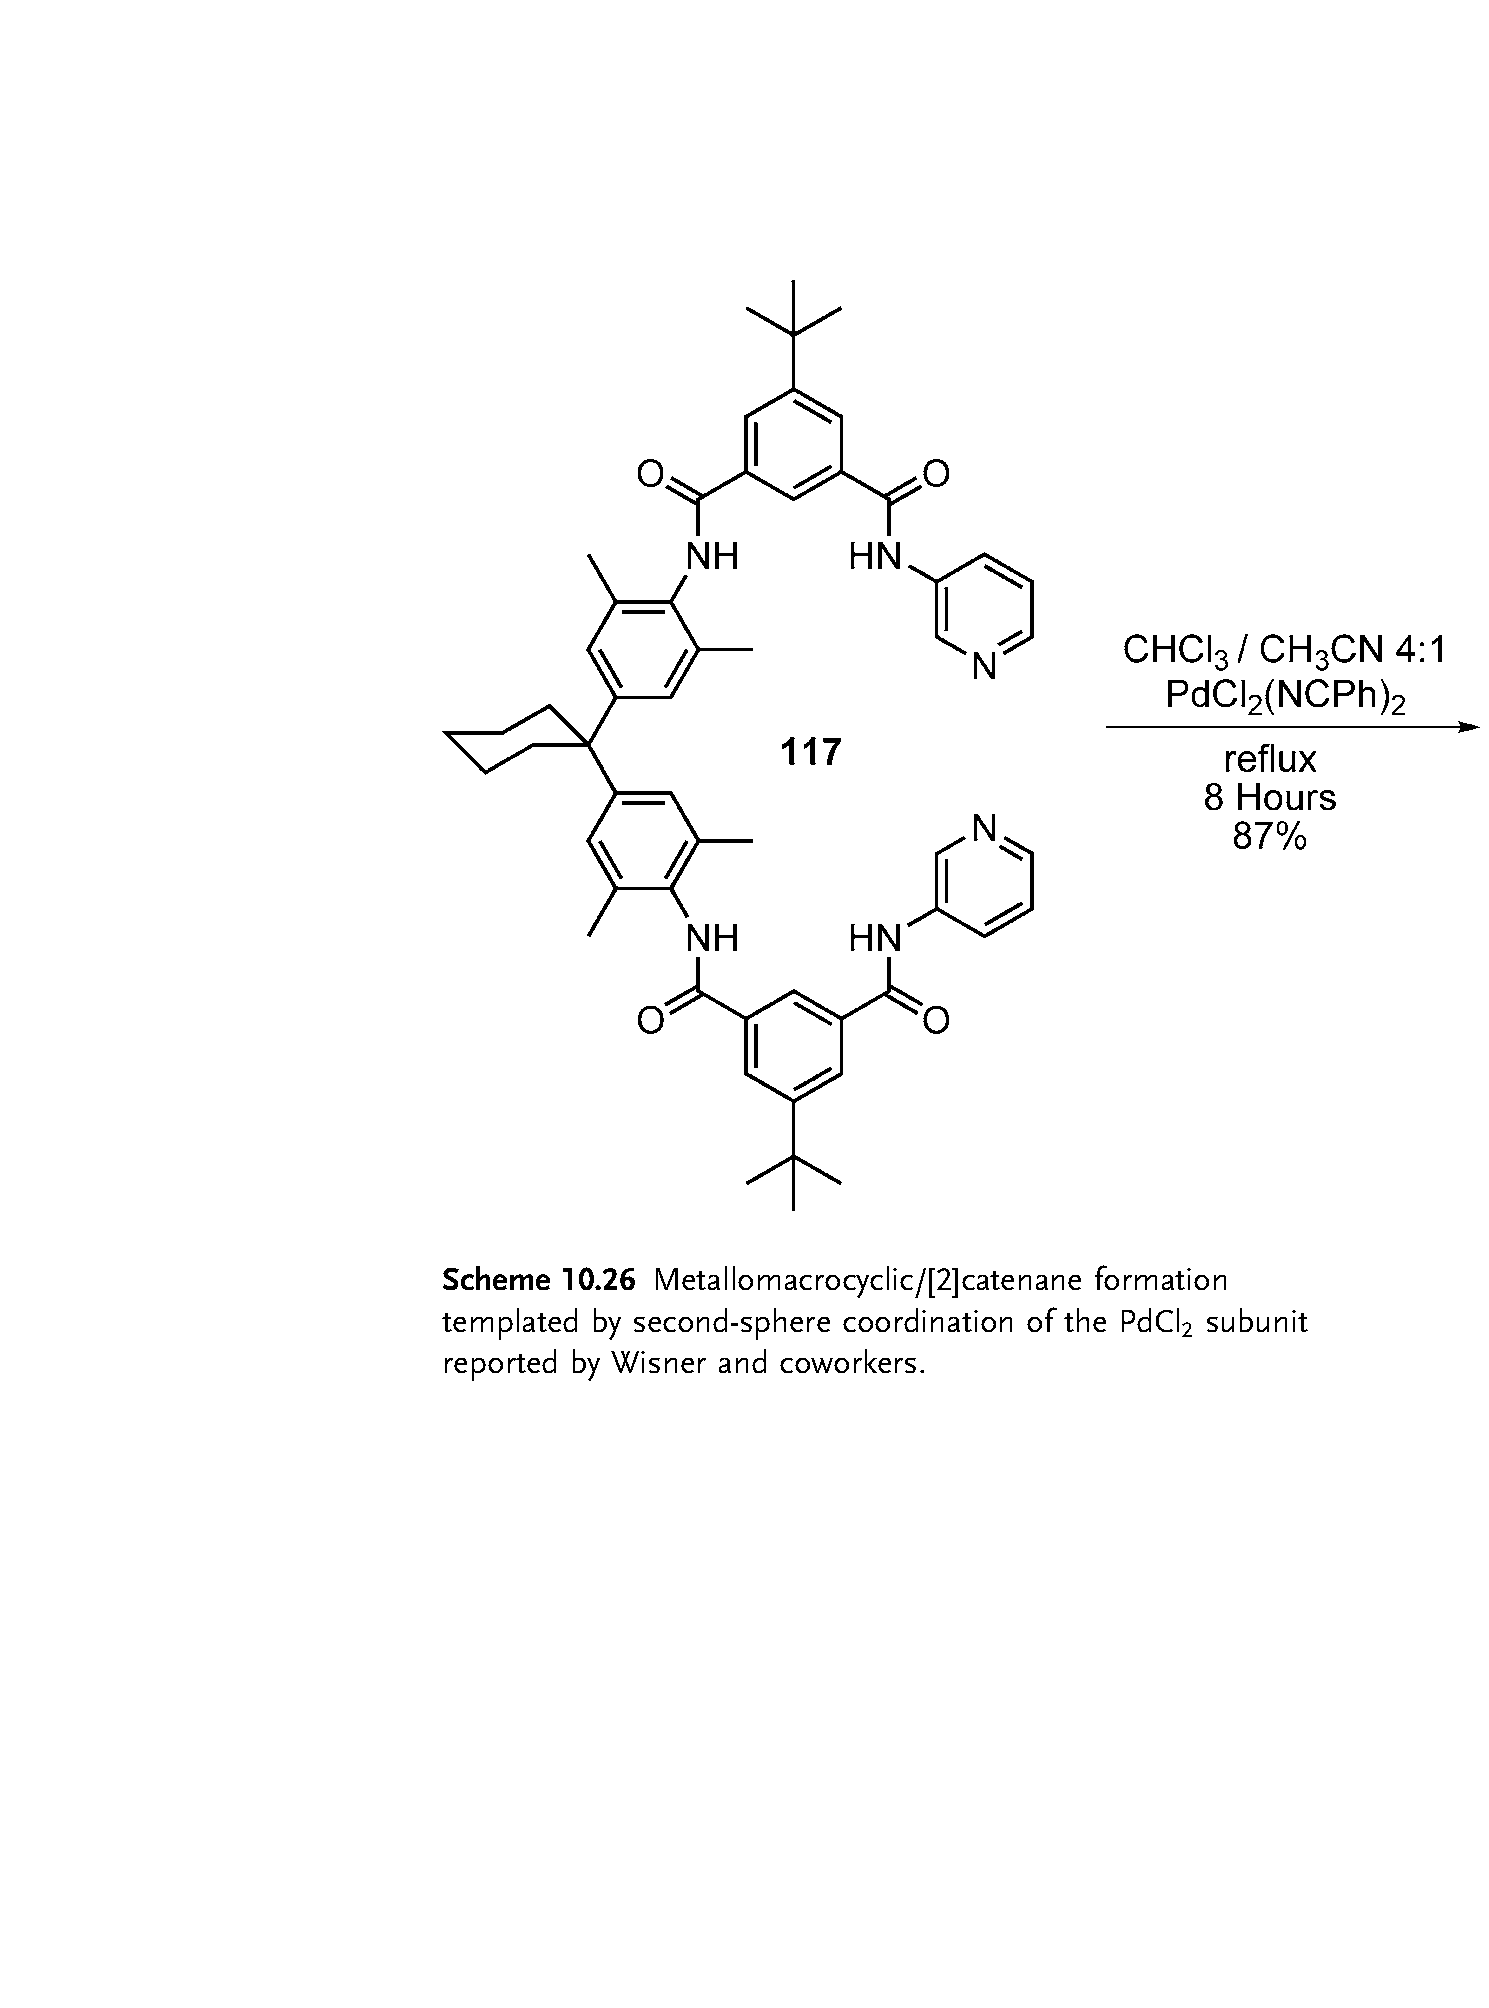 Scheme 10.26 Metallomacrocyclic/[2]catenane formation templated by second-sphere coordination of the PdCI2 subunit reported by Wisner and coworkers.